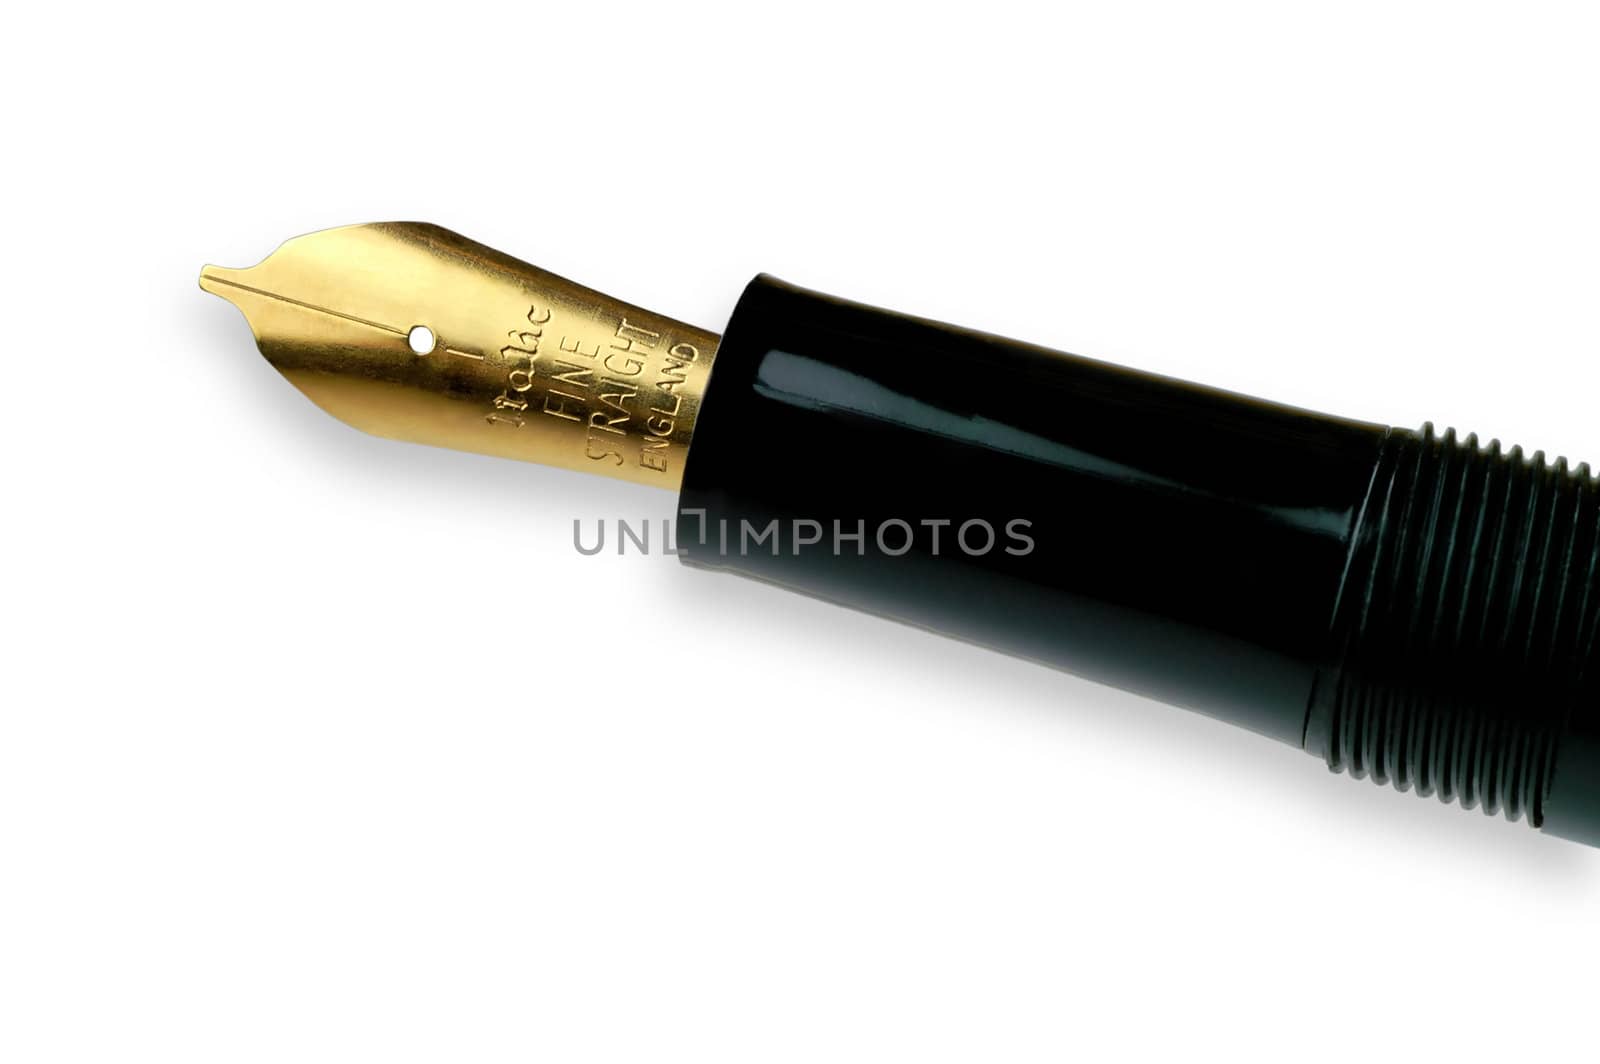 Calligraphy pen with clipping path